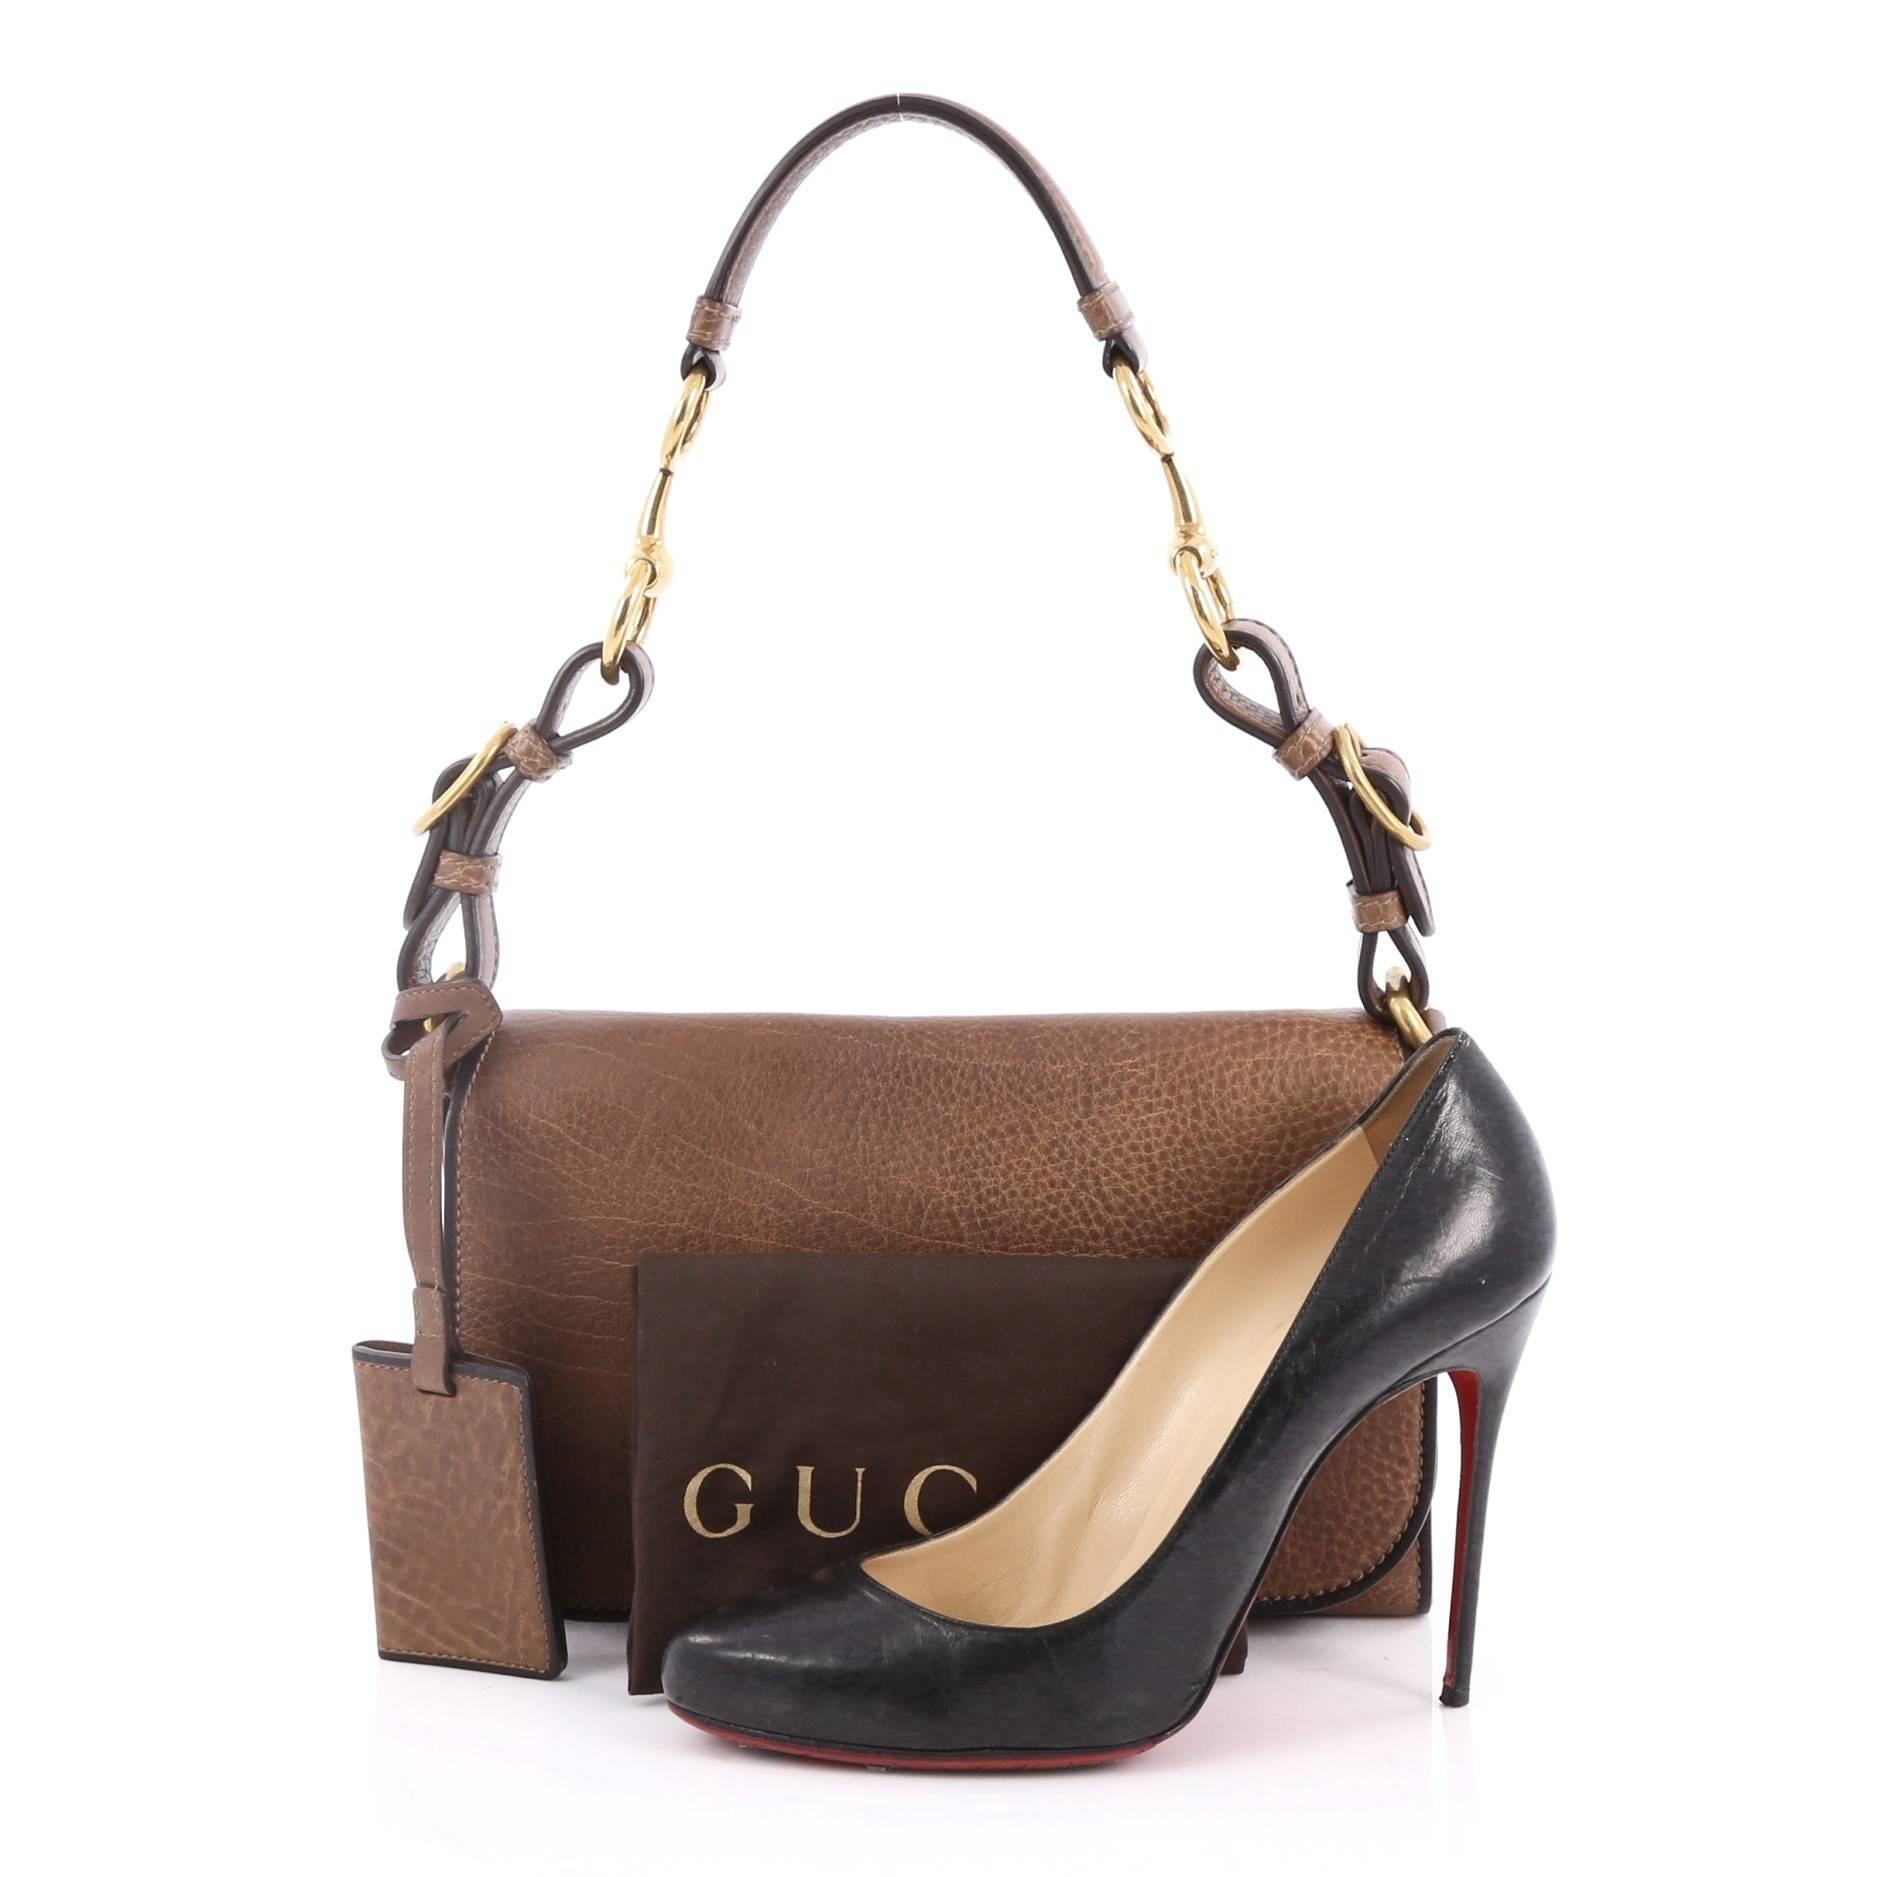 This authentic Gucci Harness Shoulder Bag Distressed Pebbled Leather Small presented in the brand's Cruise 2014 Collection is perfect for everyday use. Crafted in brown distressed pebbled leather, this heritage-inspired industrial flap bag features